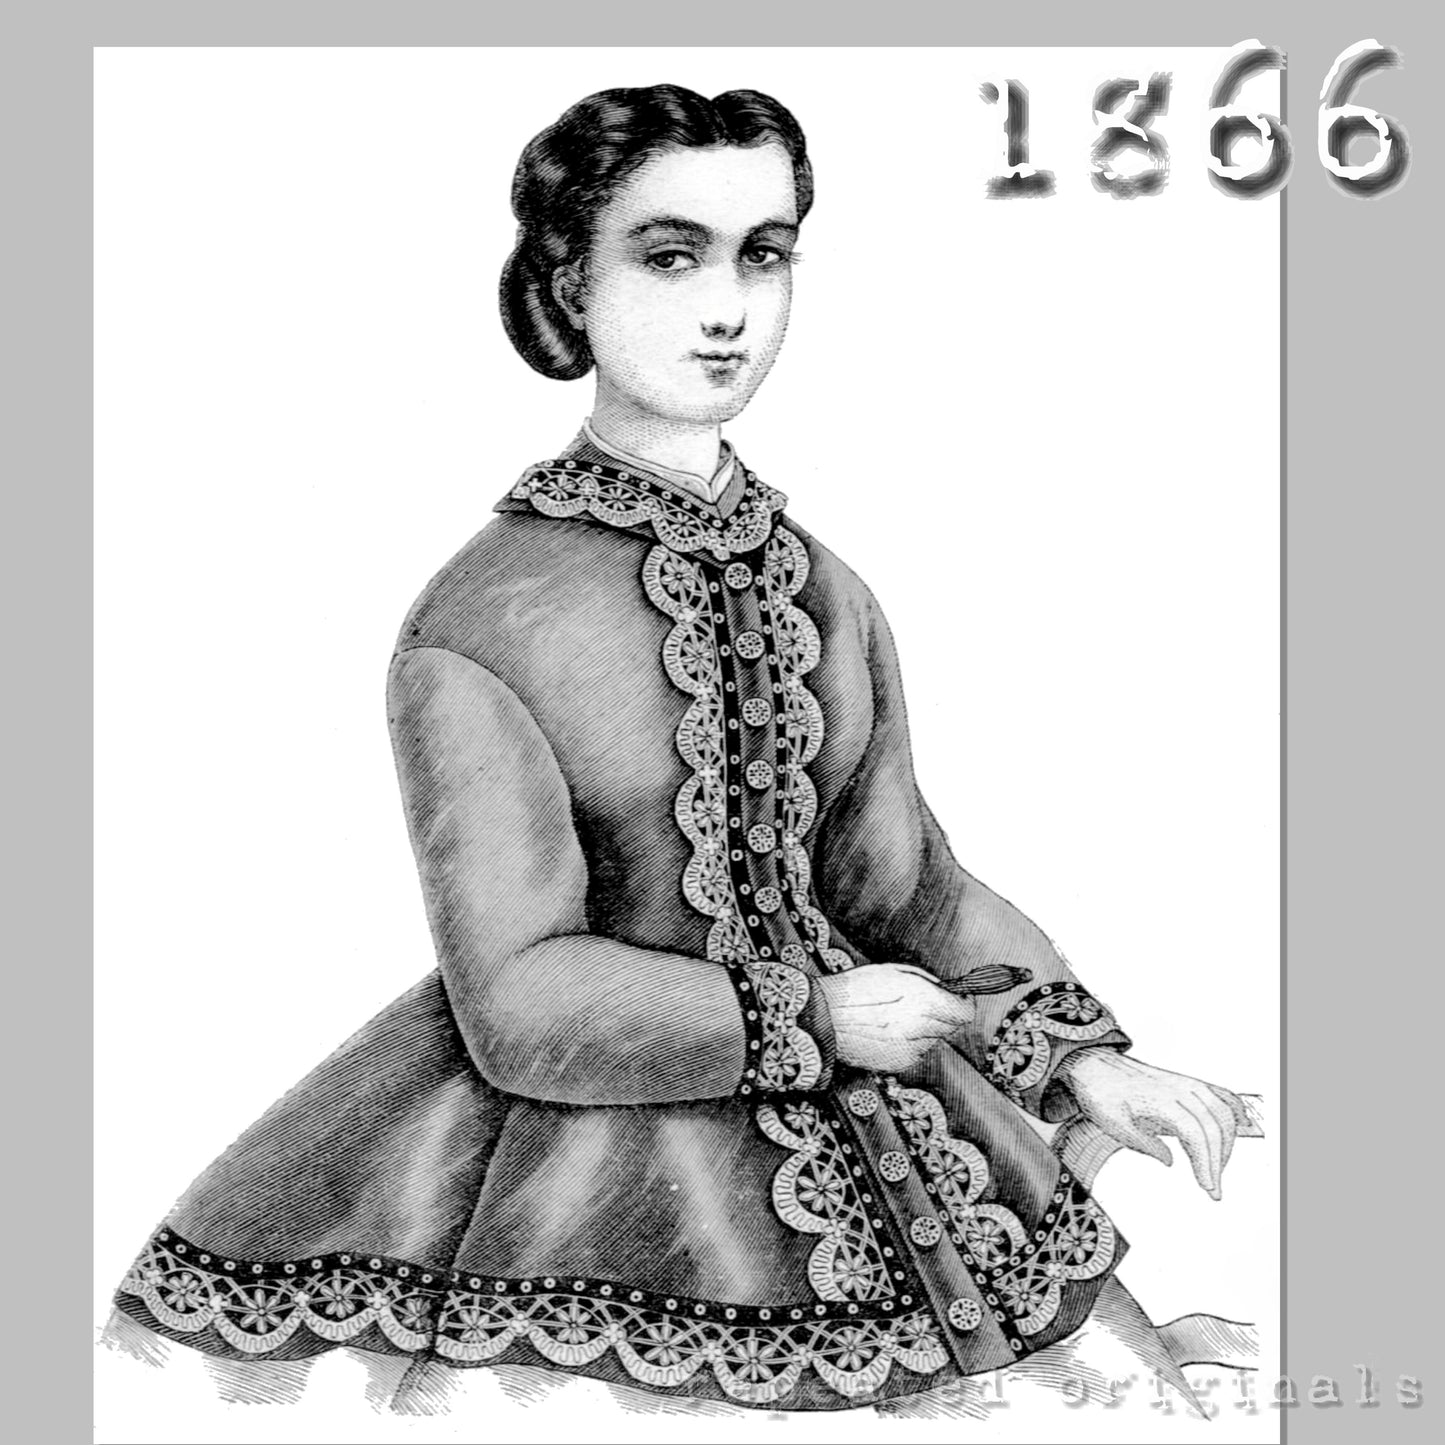 1866 Spring Coat / Pardessus Sewing Pattern - INSTANT DOWNLOAD PDF